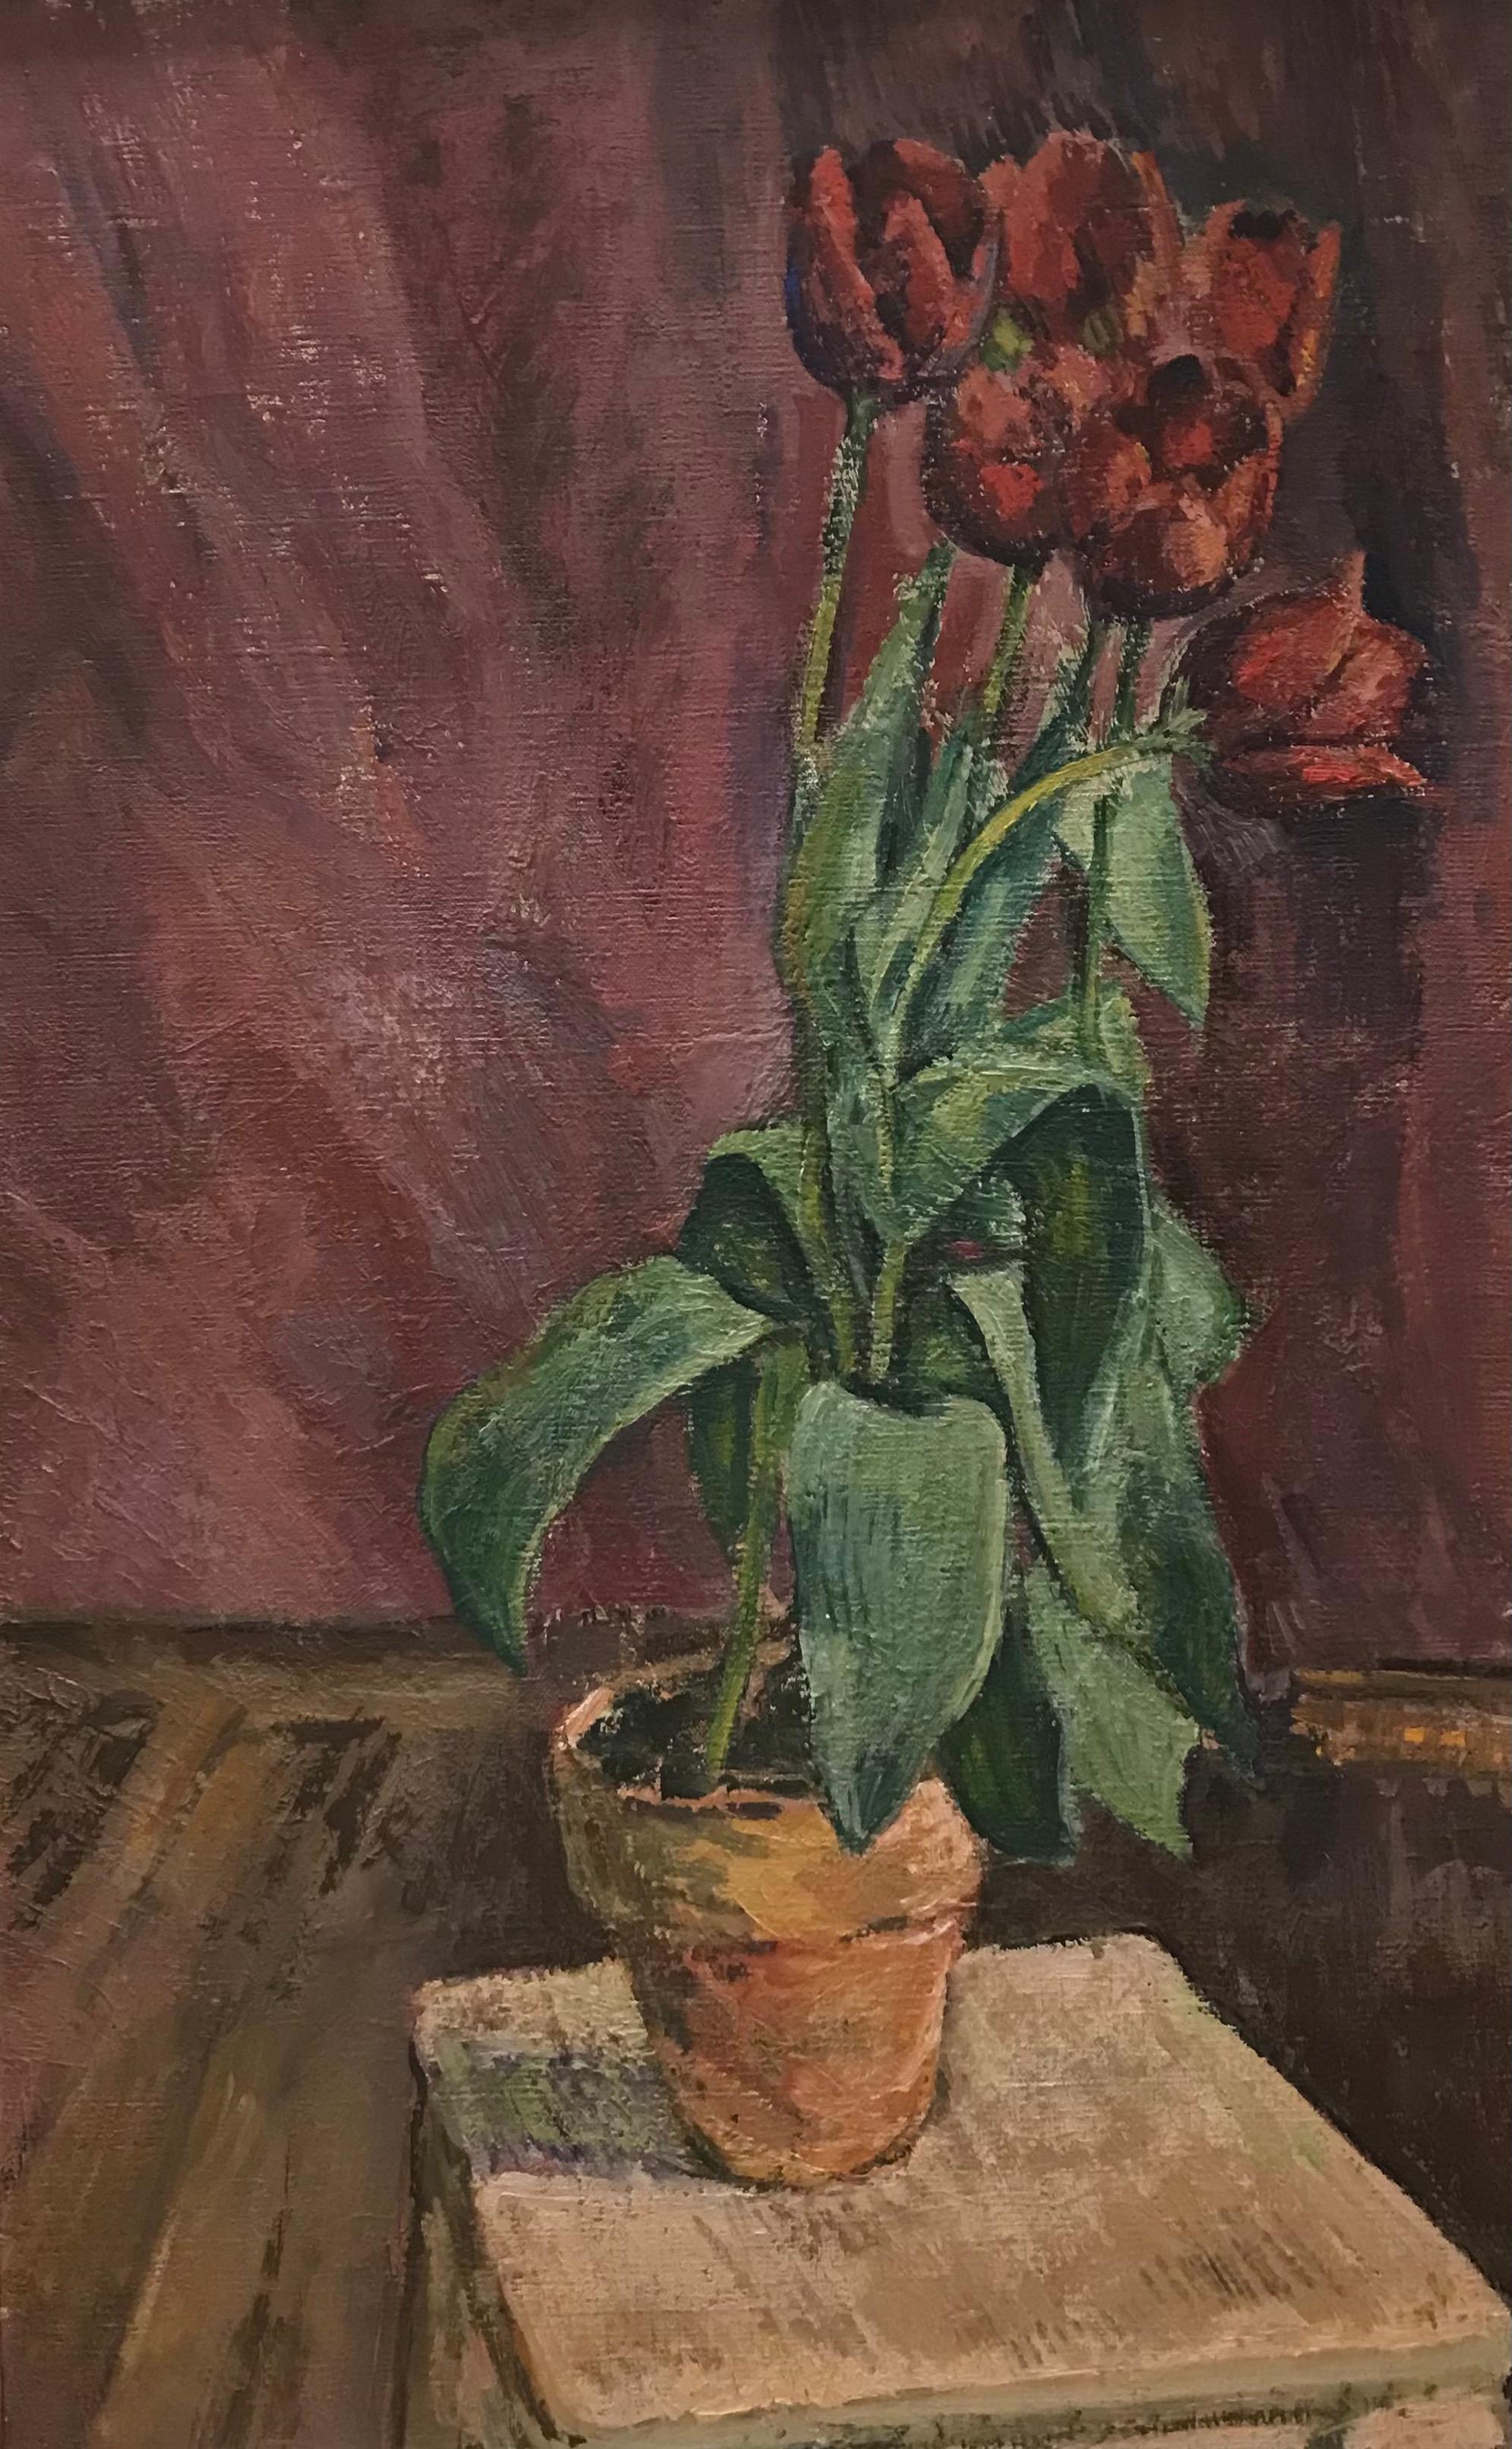 Potted daffodils - Still life oil on canvas 